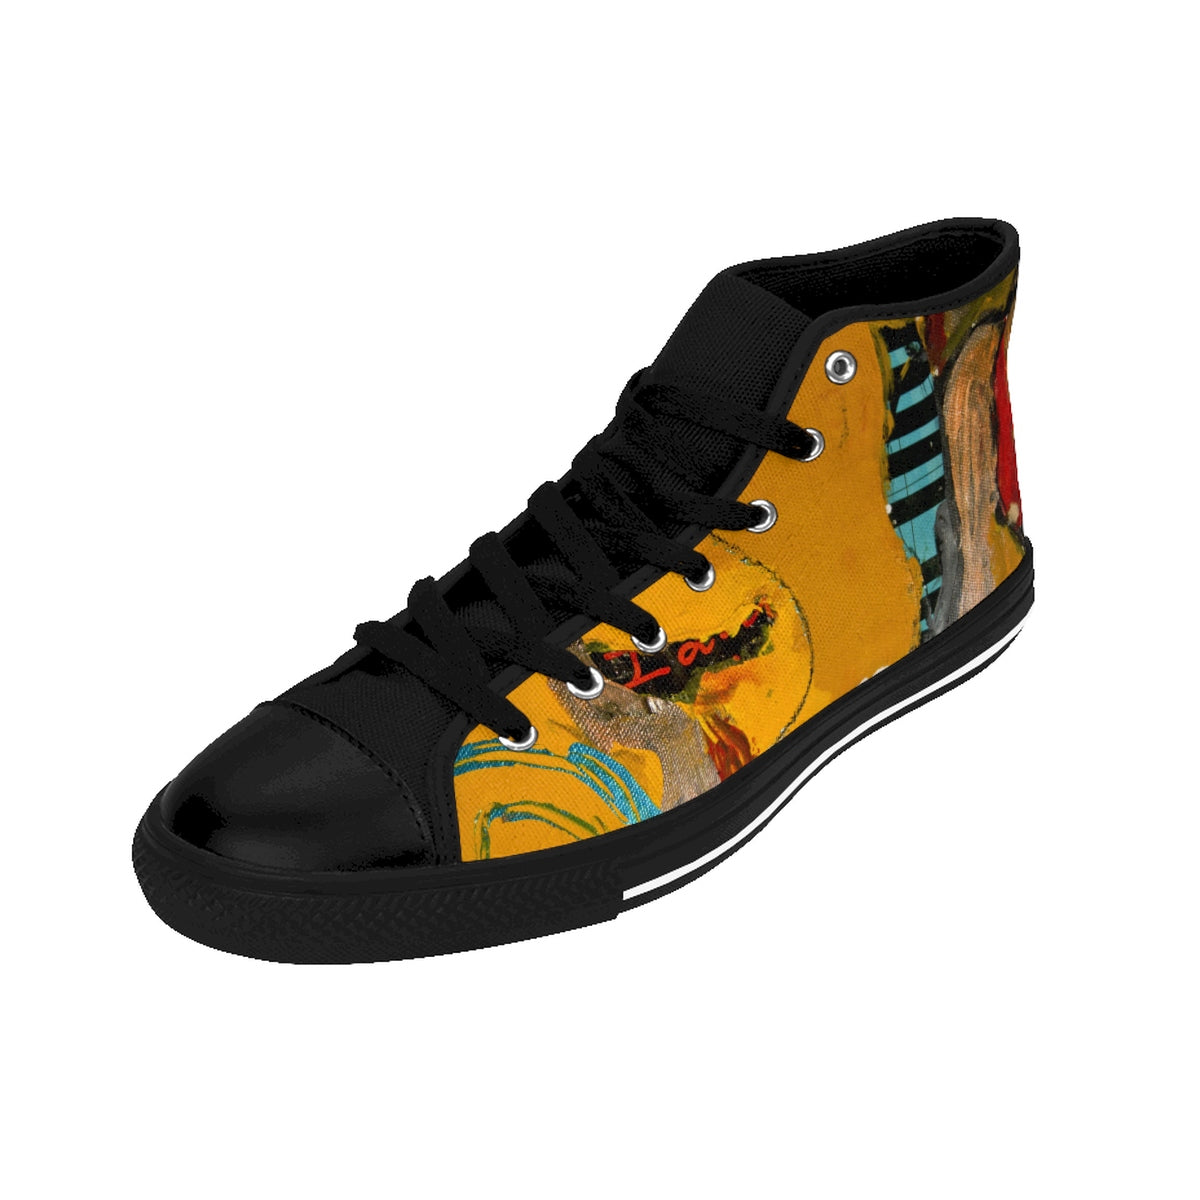 why not?- Women's High-top Sneakers